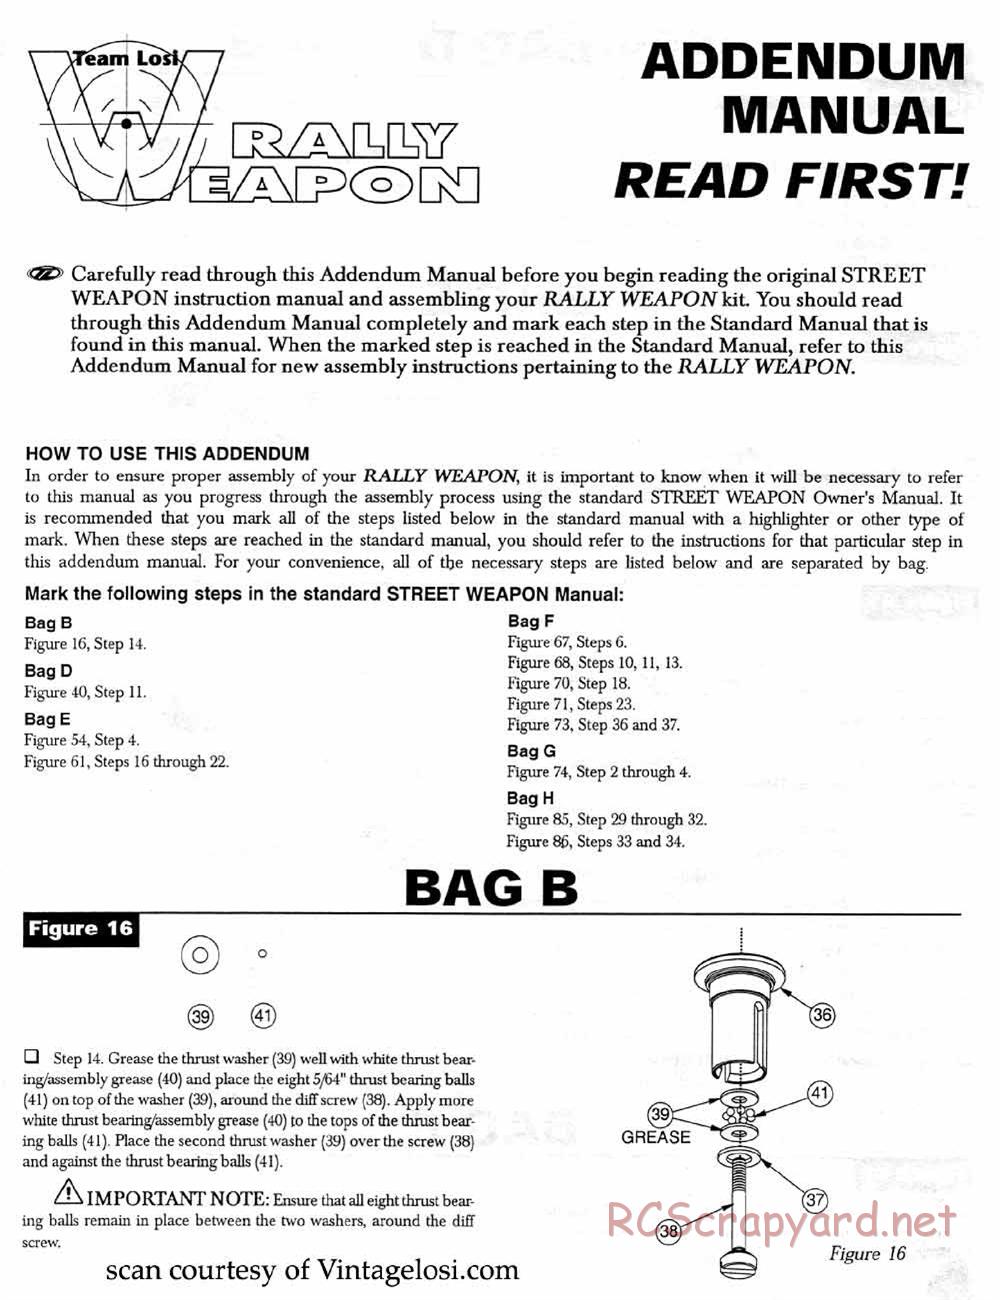 Team Losi - Rally Weapon - Manual - Page 1